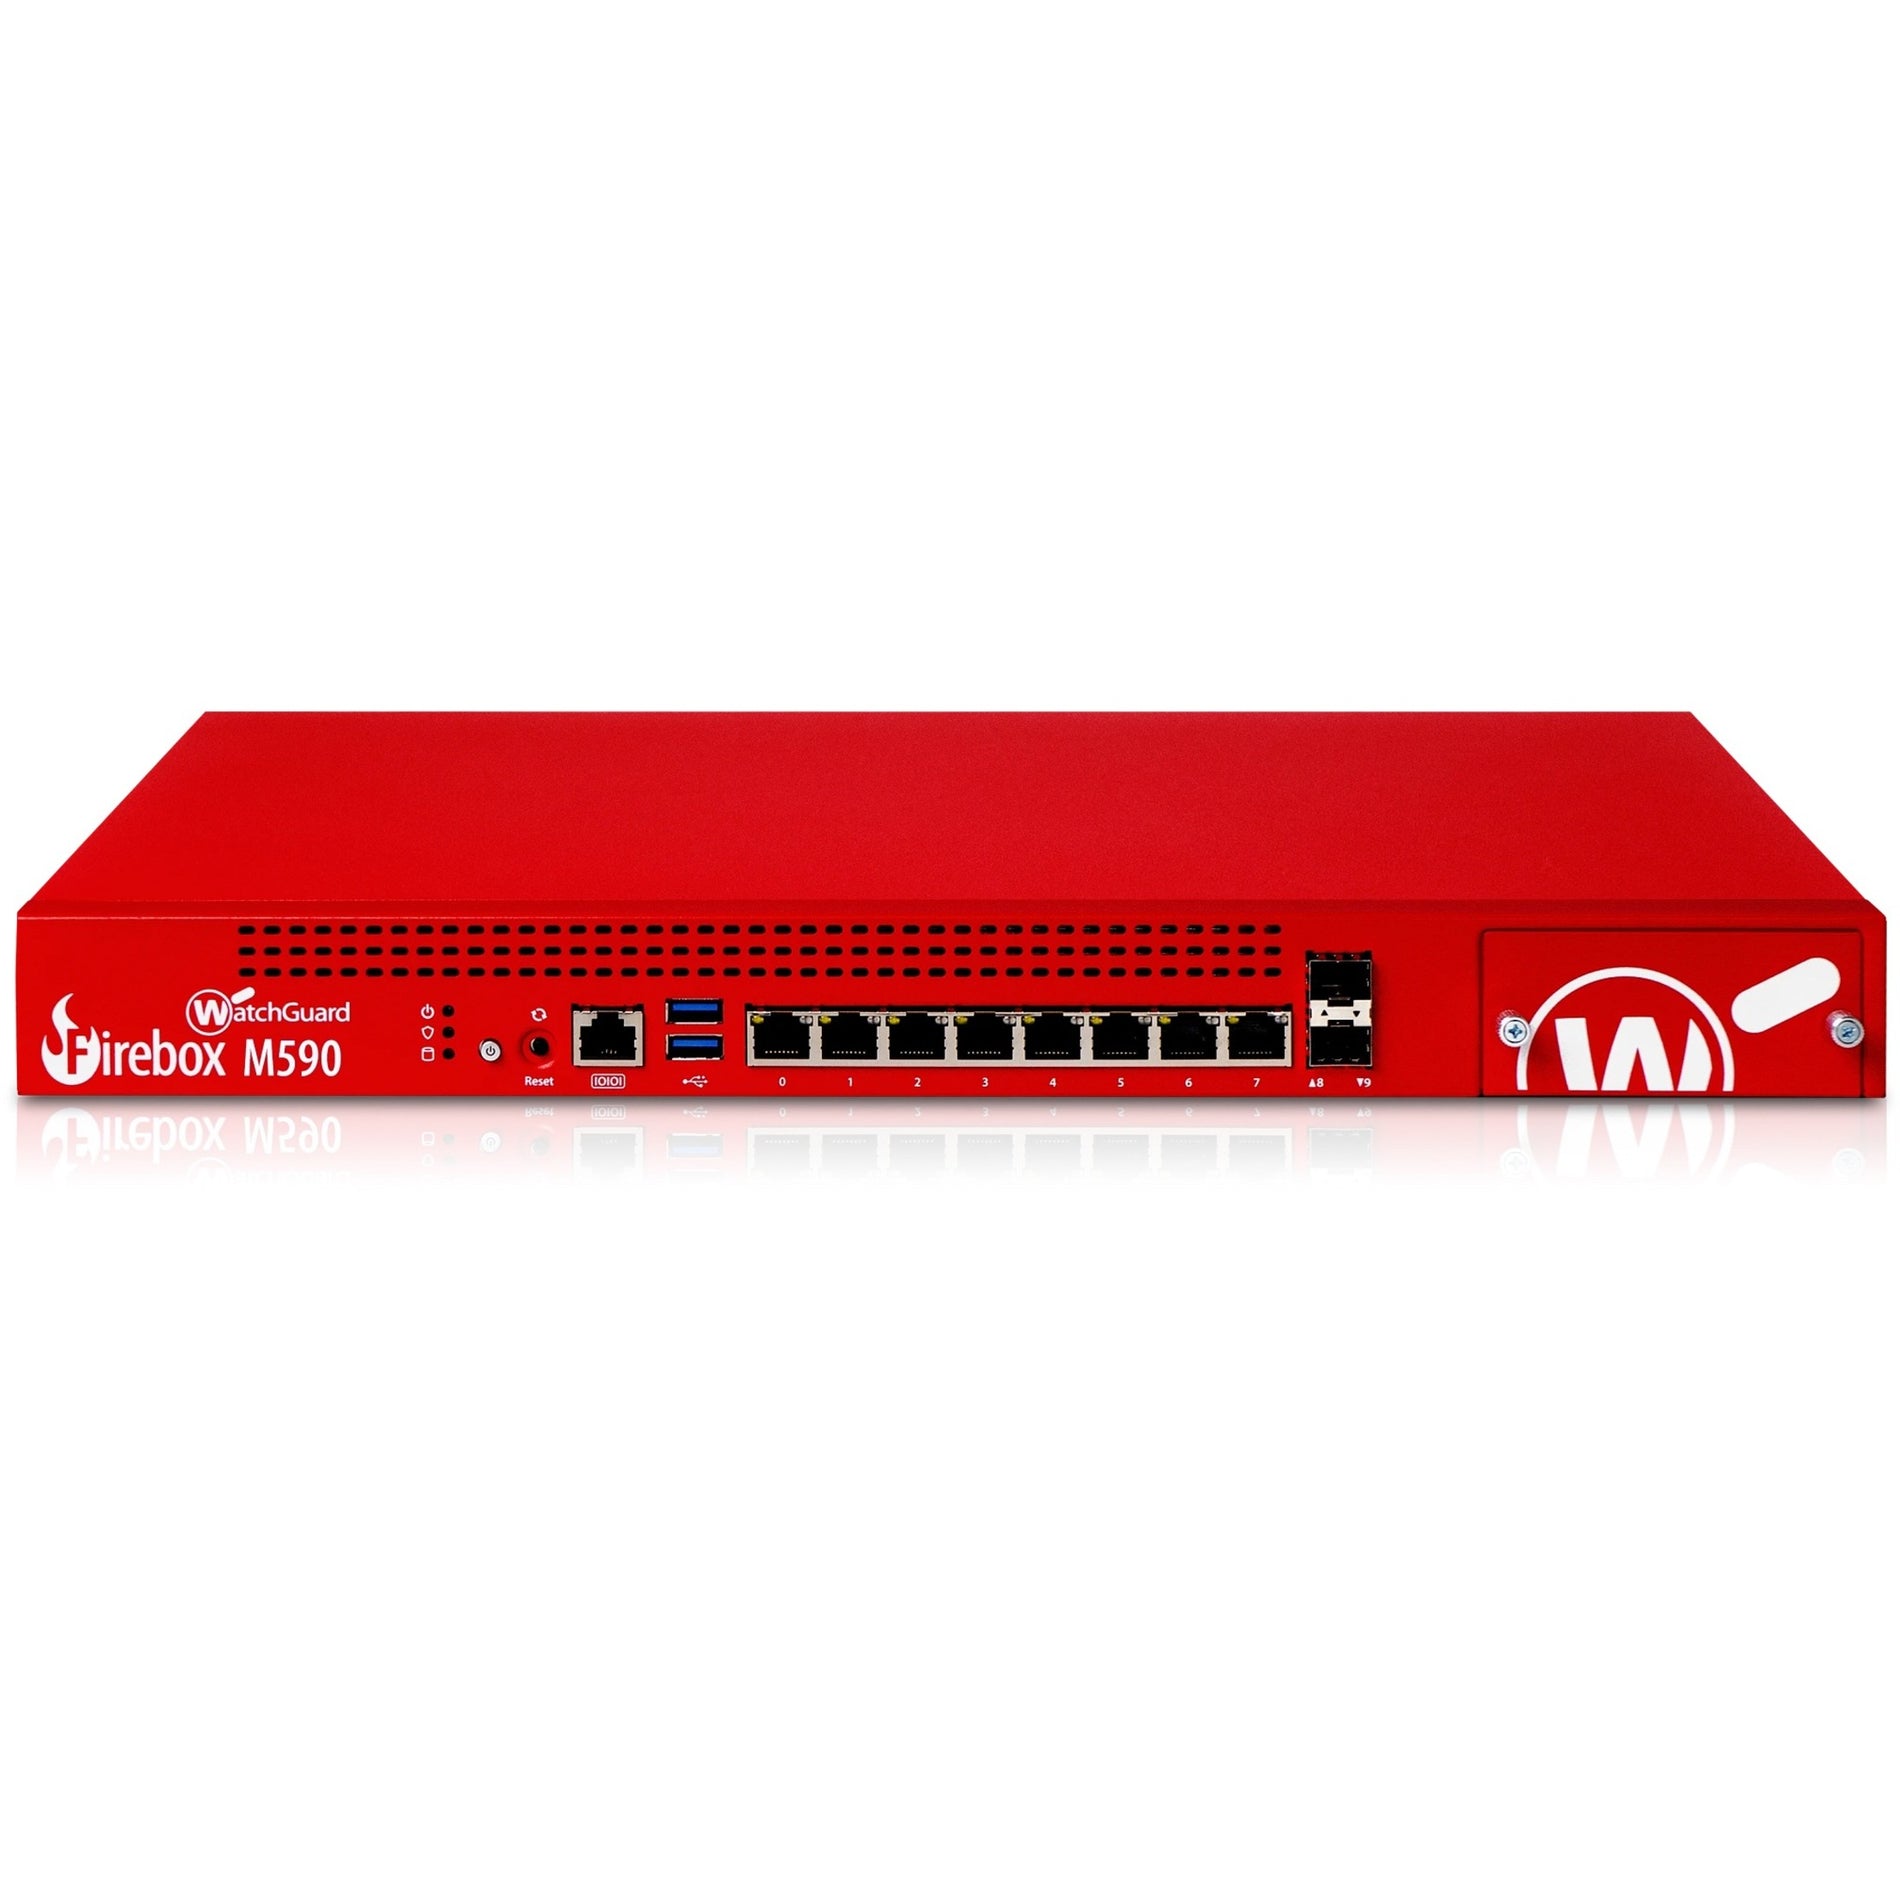 WatchGuard WGM59002101 Firebox M590 Network Security/Firewall Appliance, Total Security Suite, 8 Ports, 10 Gigabit Ethernet